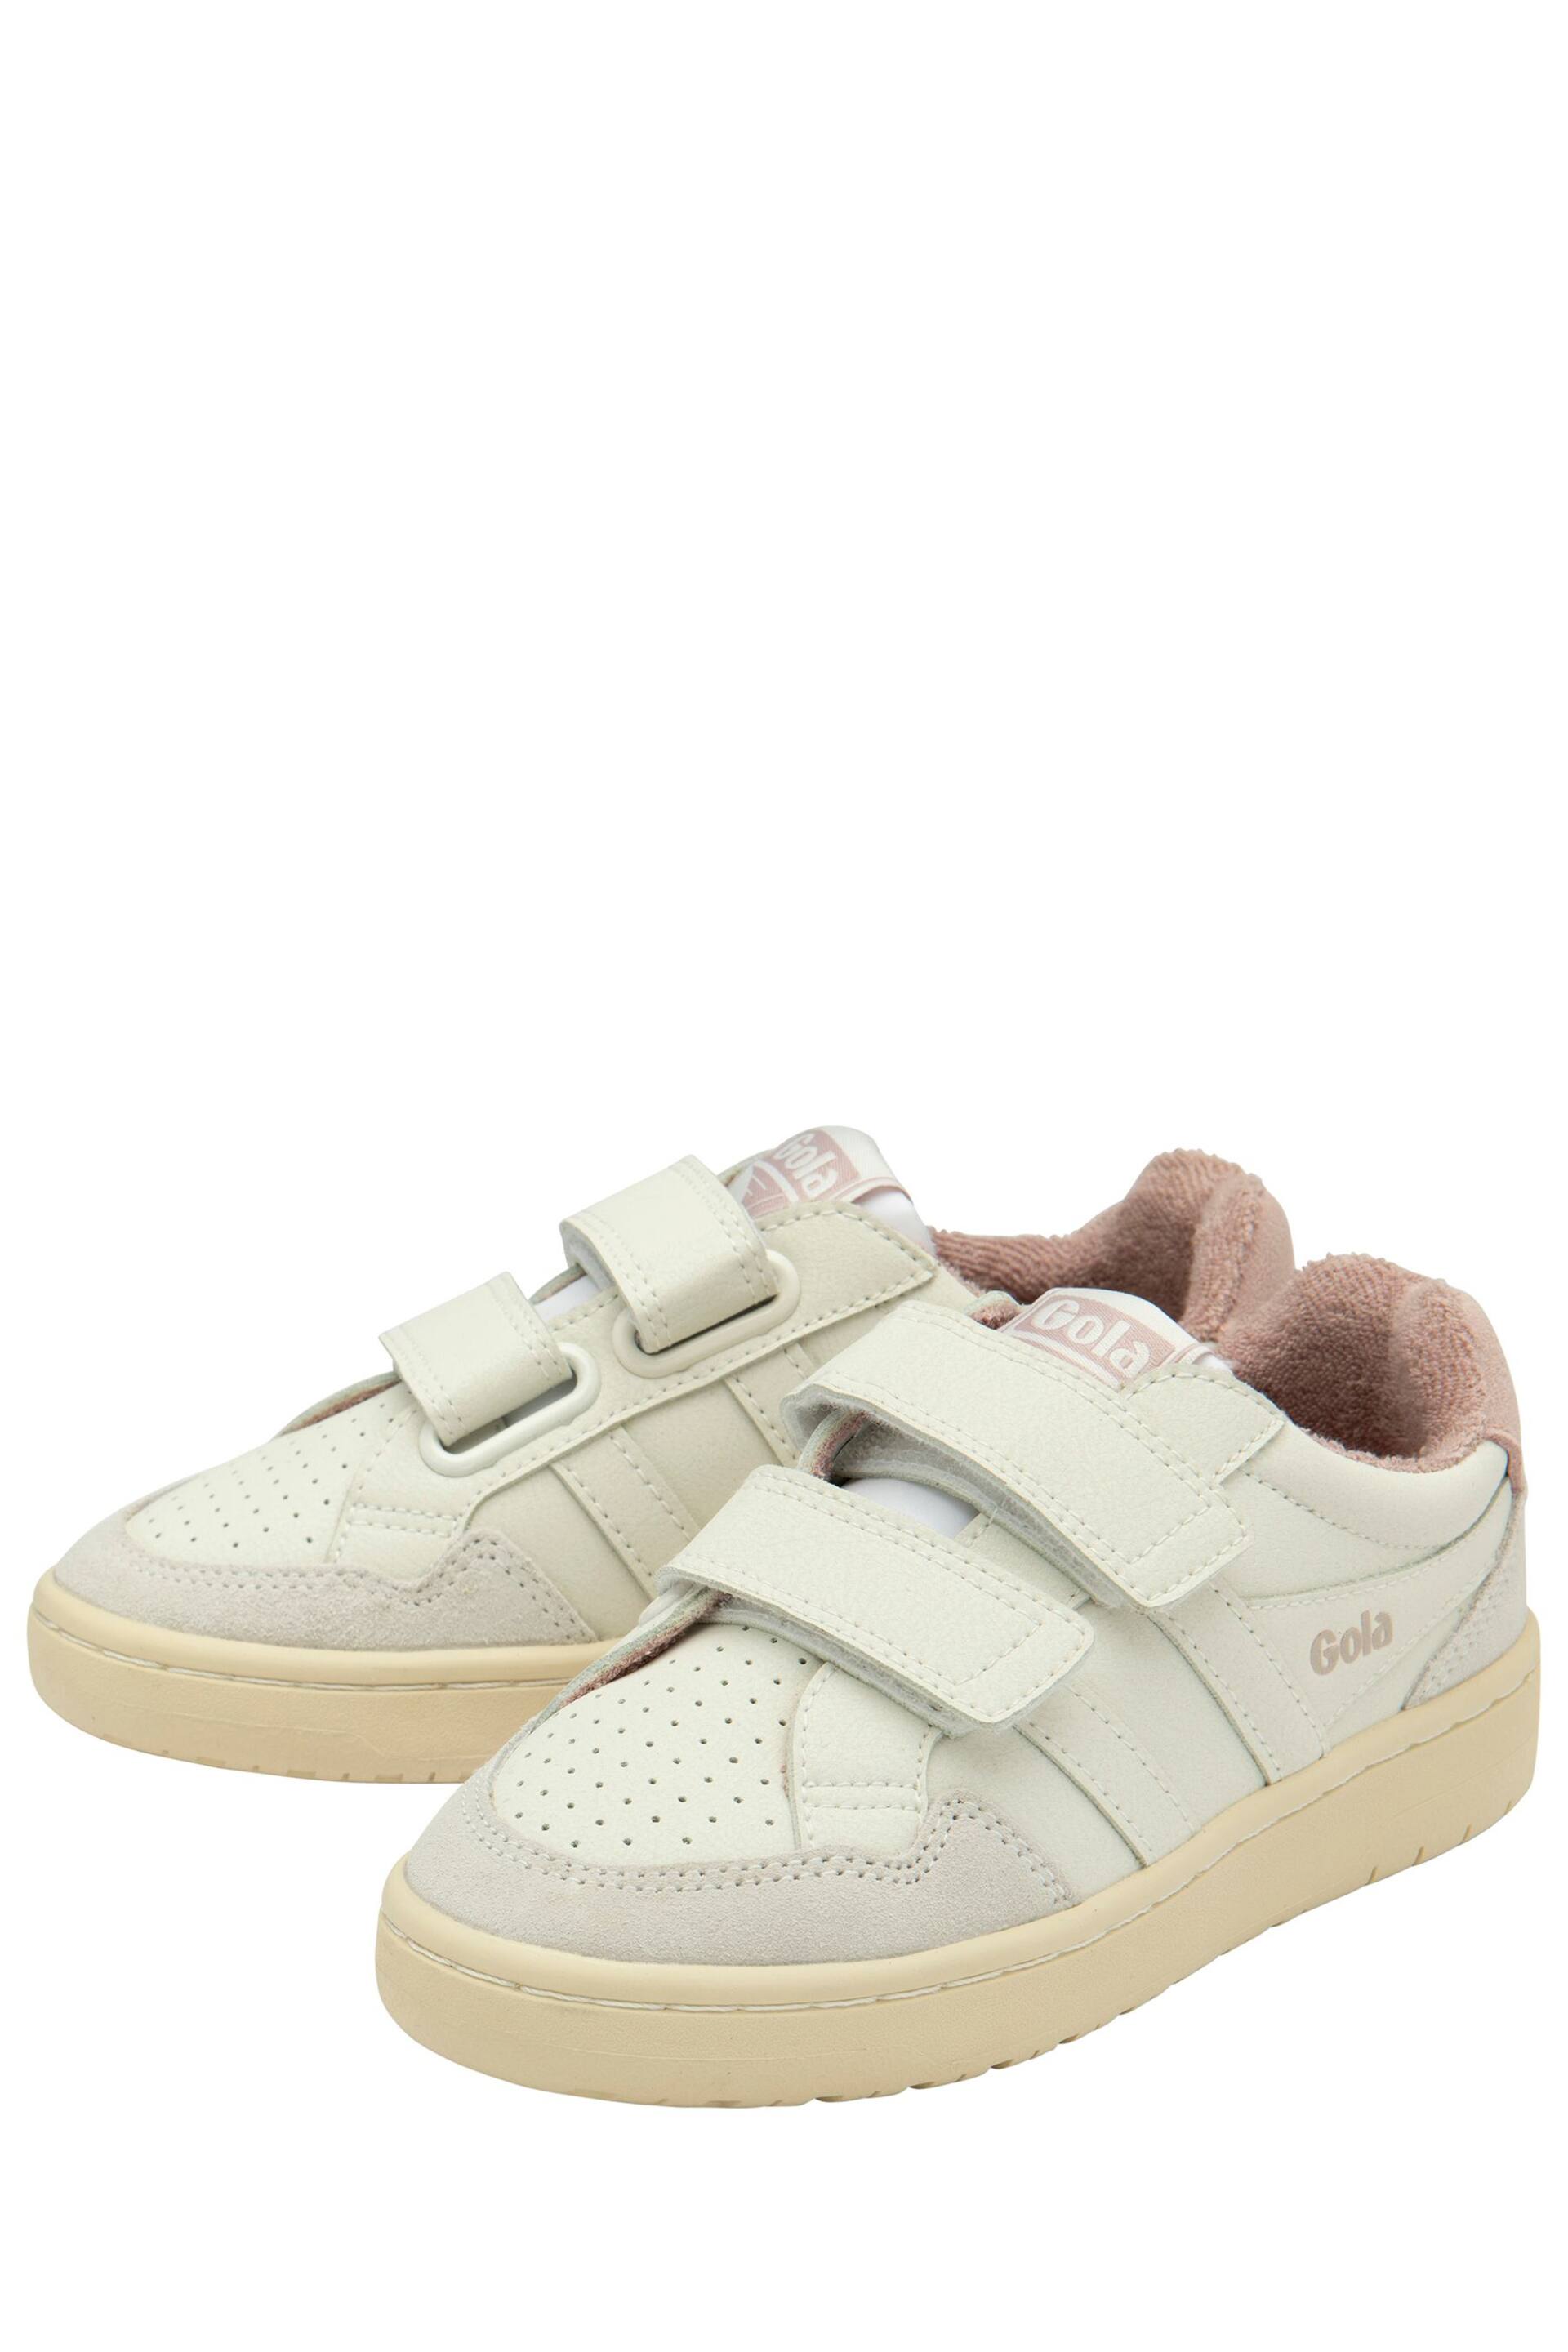 Gola Off White/Peony Kids Eagle Strap Trainers - Image 2 of 4